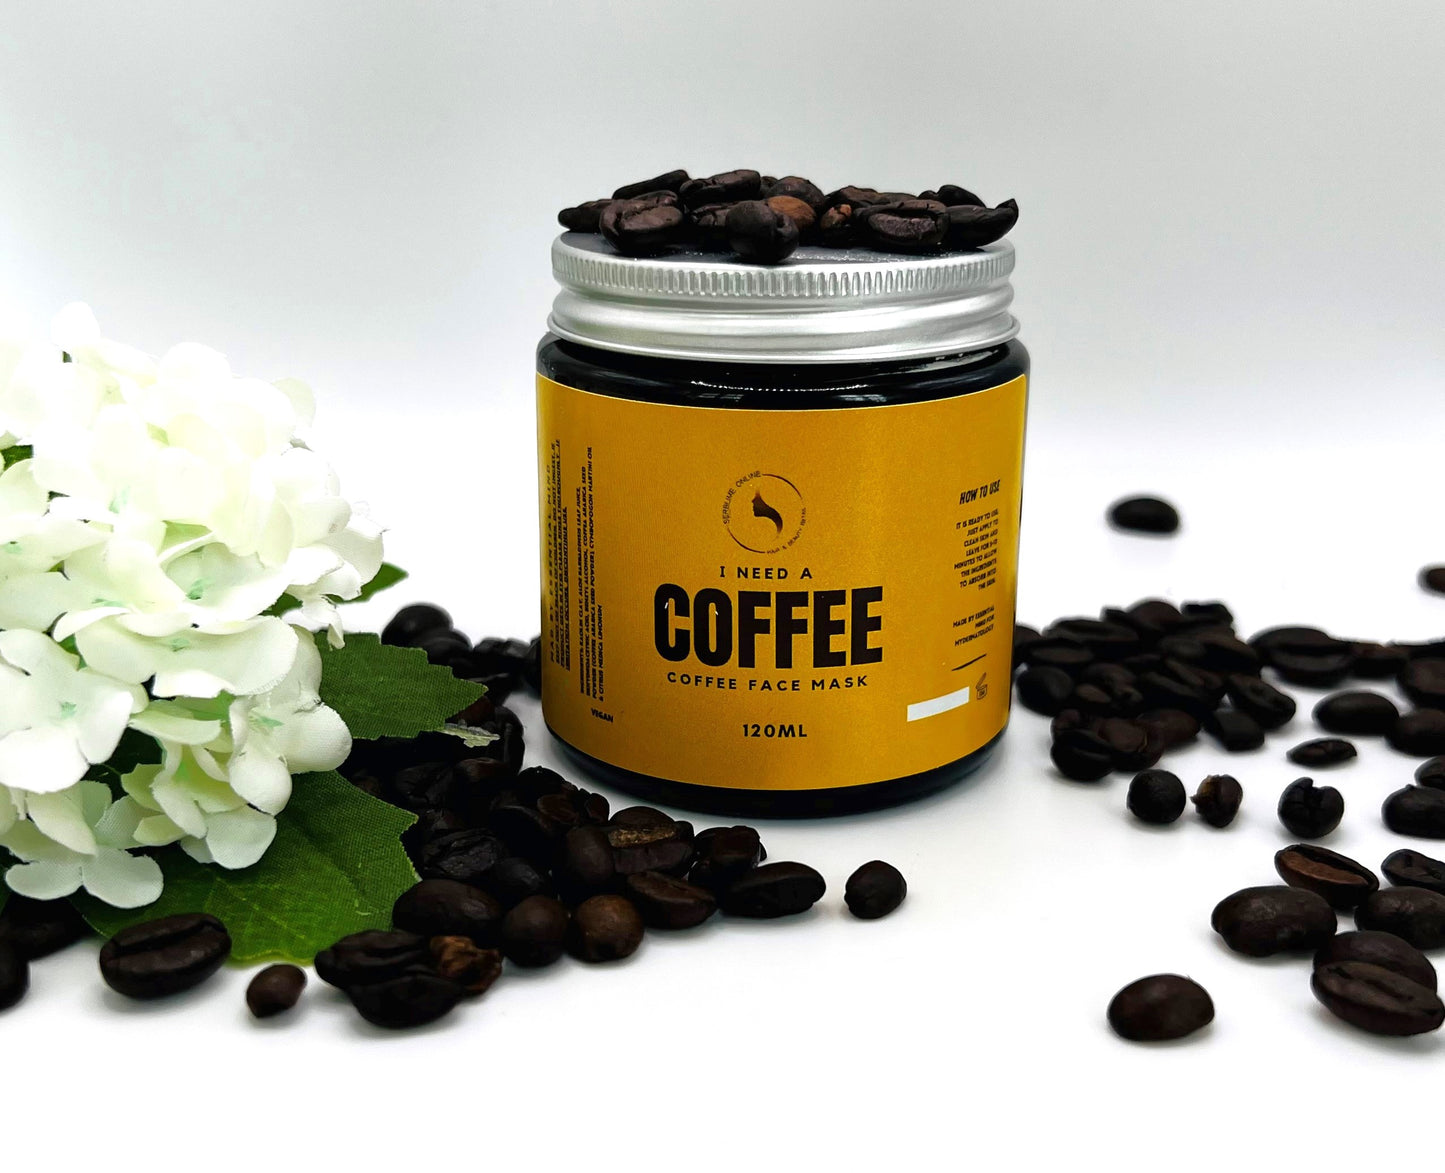 I Need a Coffee Face Mask Cream 120ml - by Essential Mind